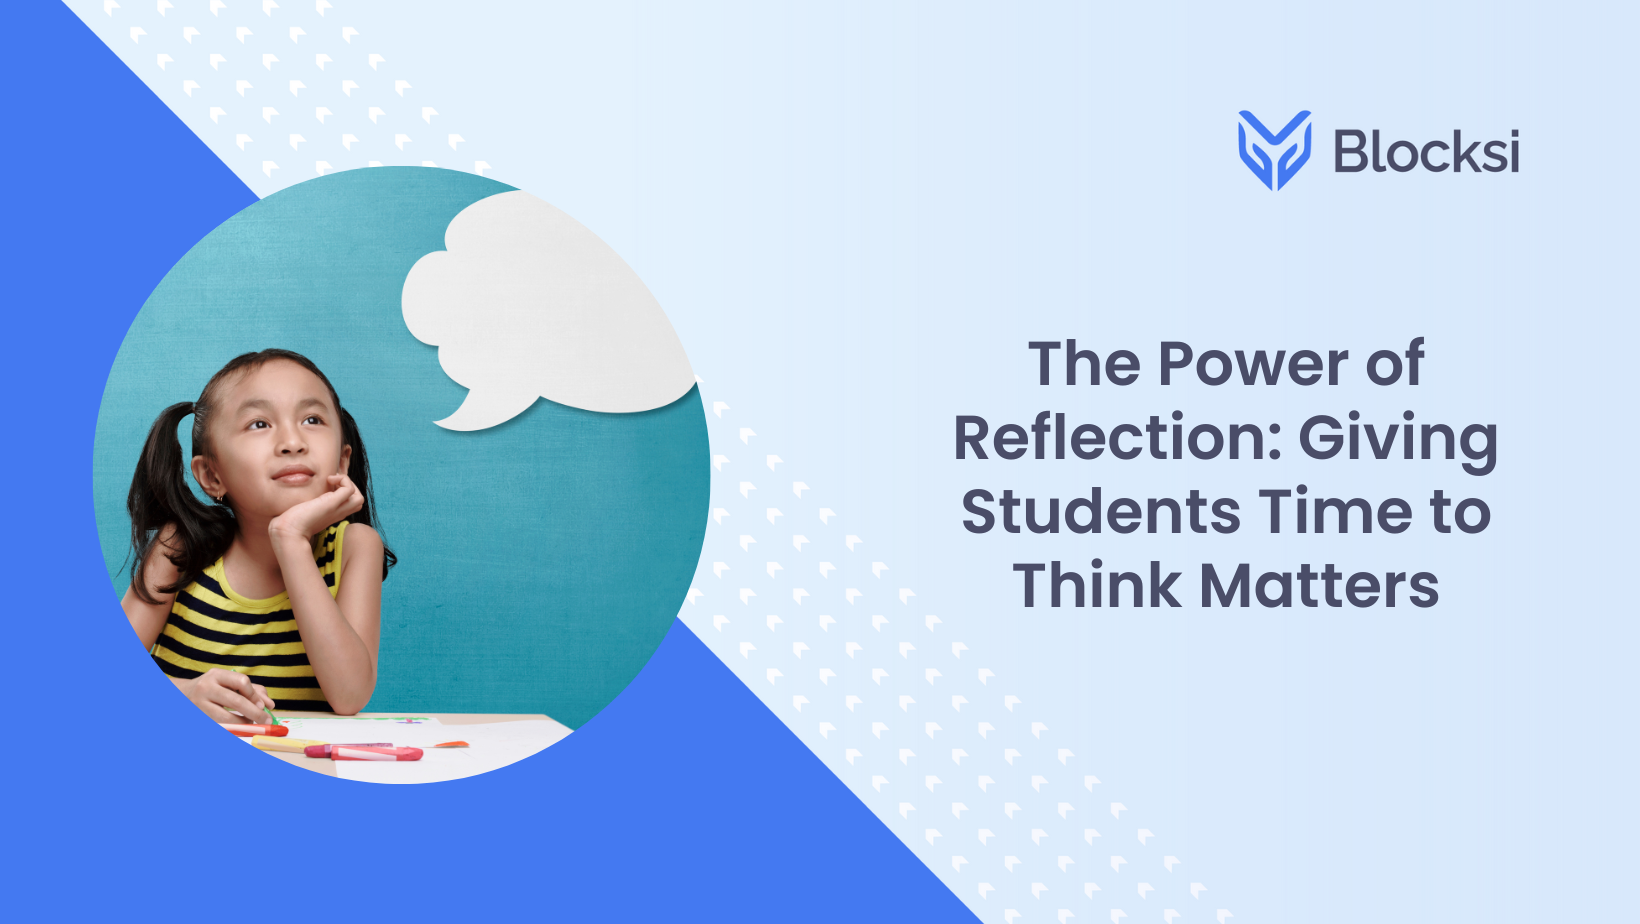 The Power of Reflection: Giving Students Time to Think Matters